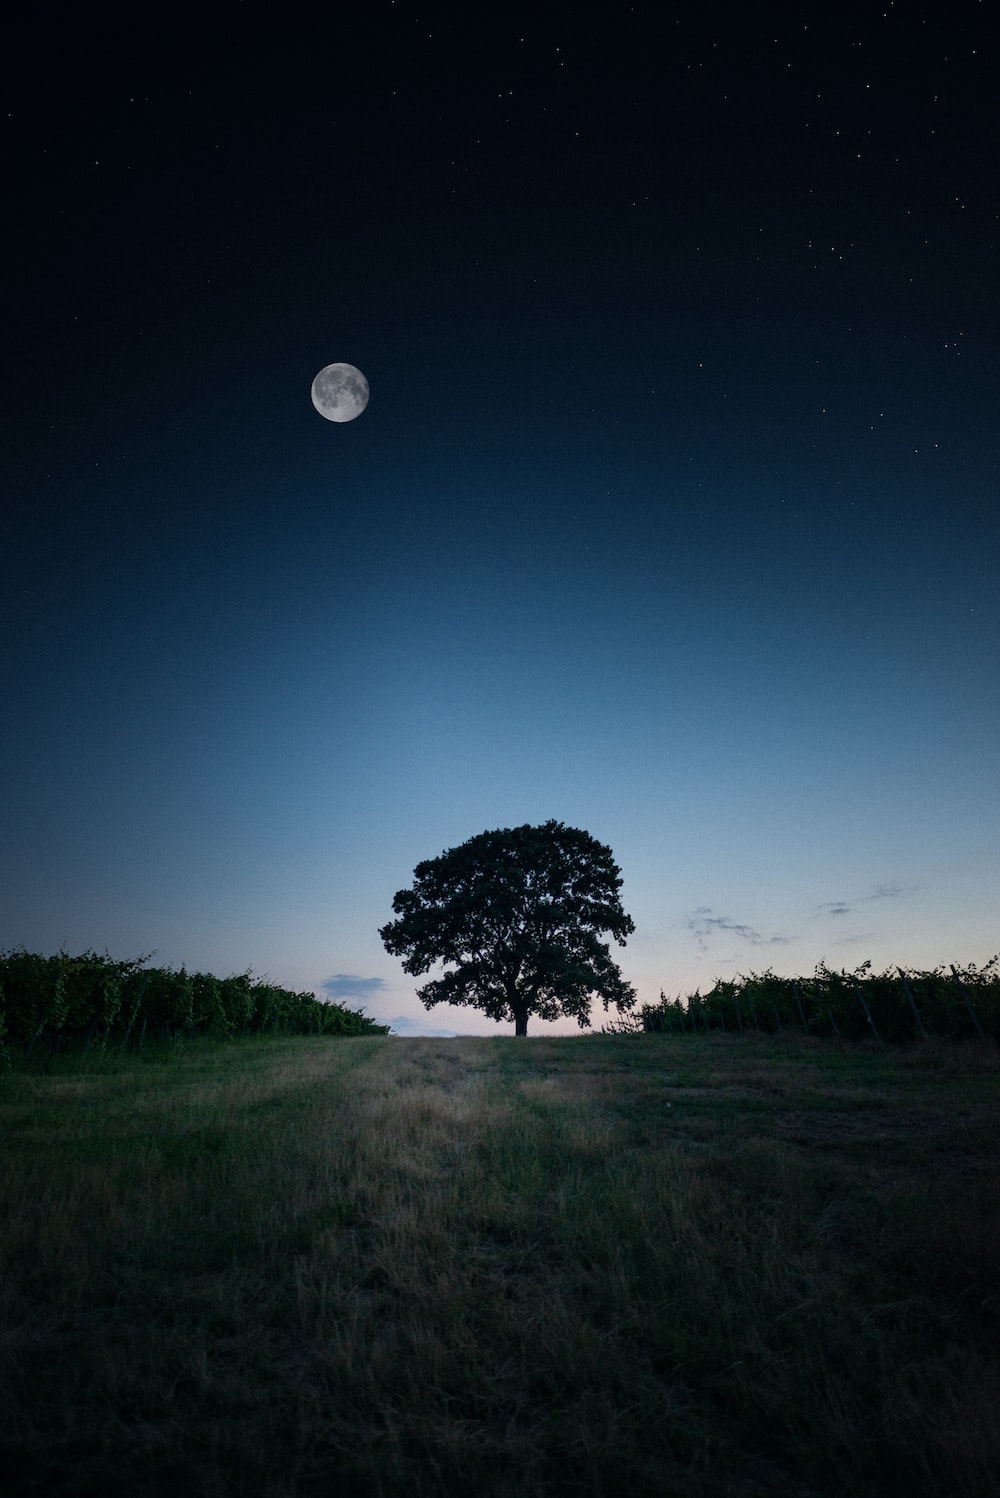 Moon Tree Picture. Download Free Image